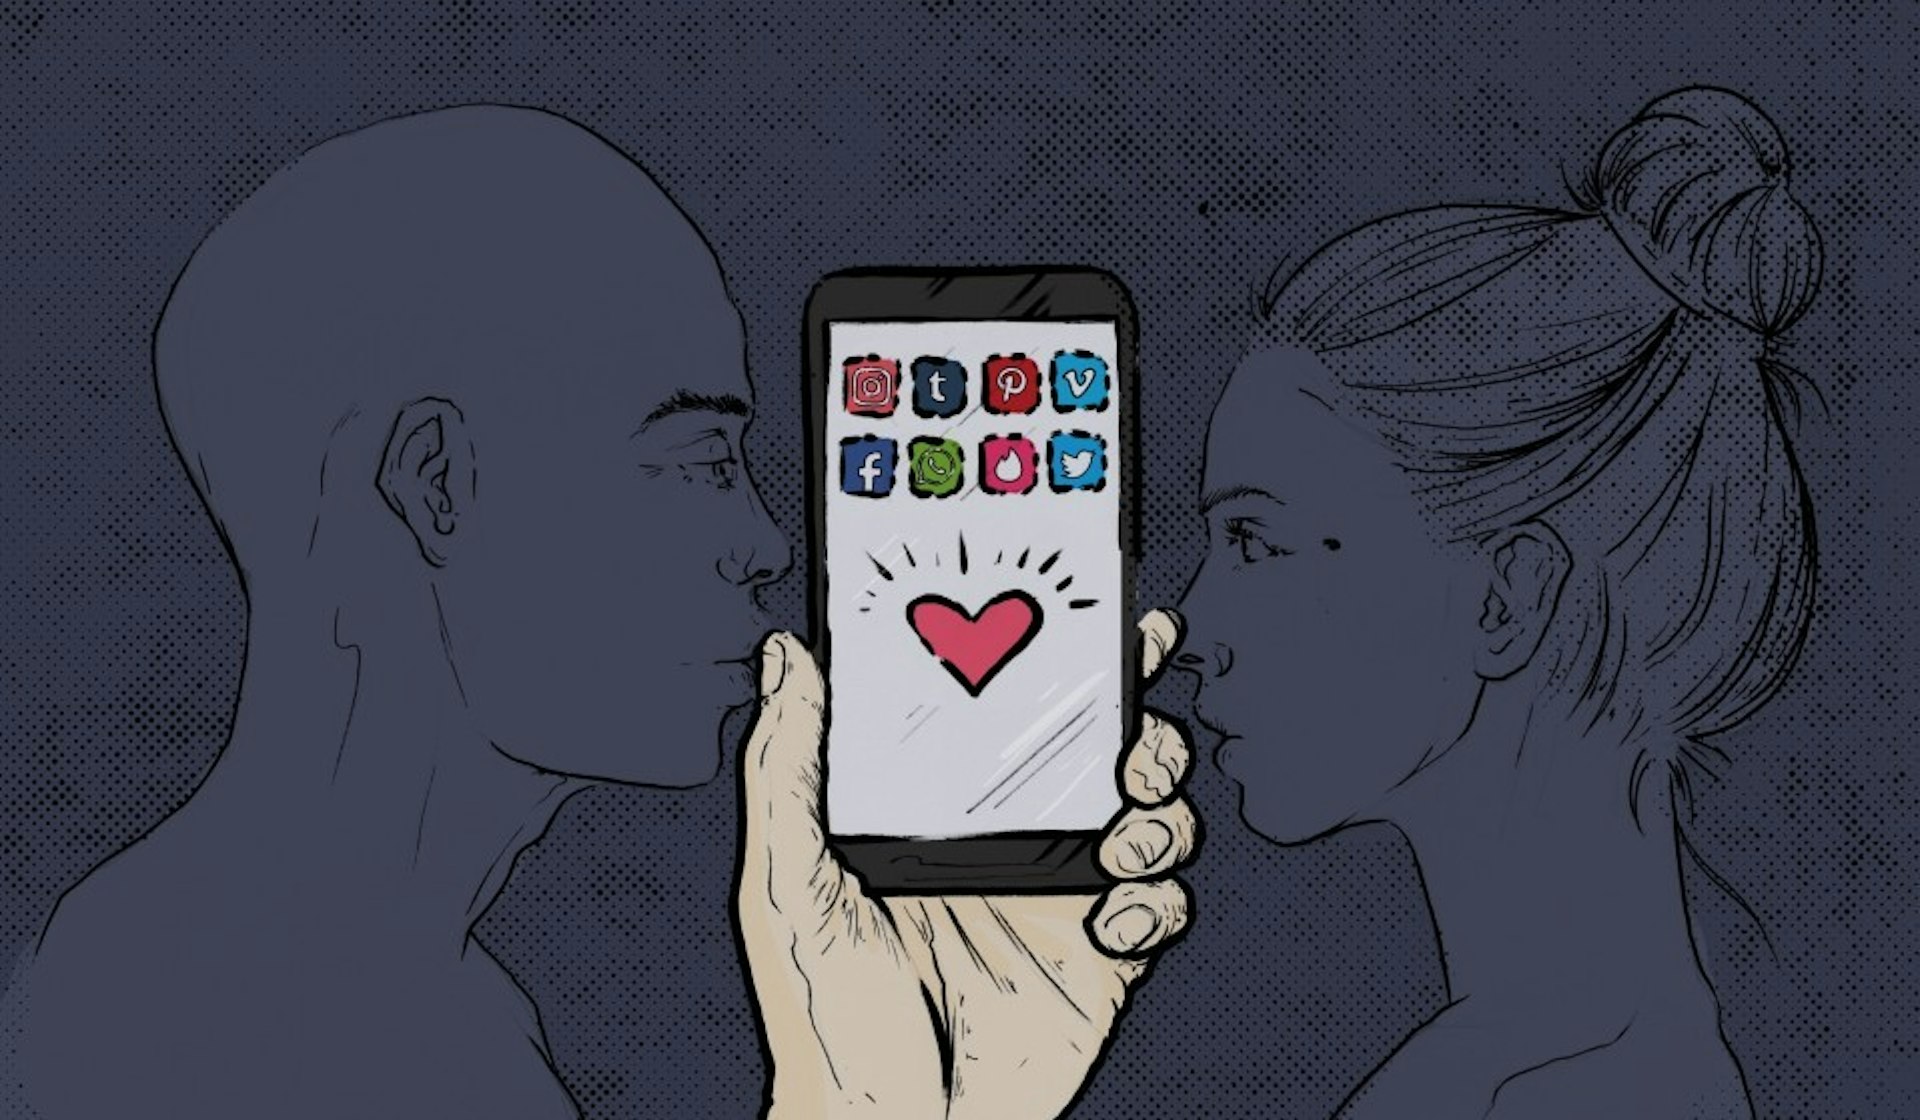 Relationships are complex – we shouldn’t have to label them